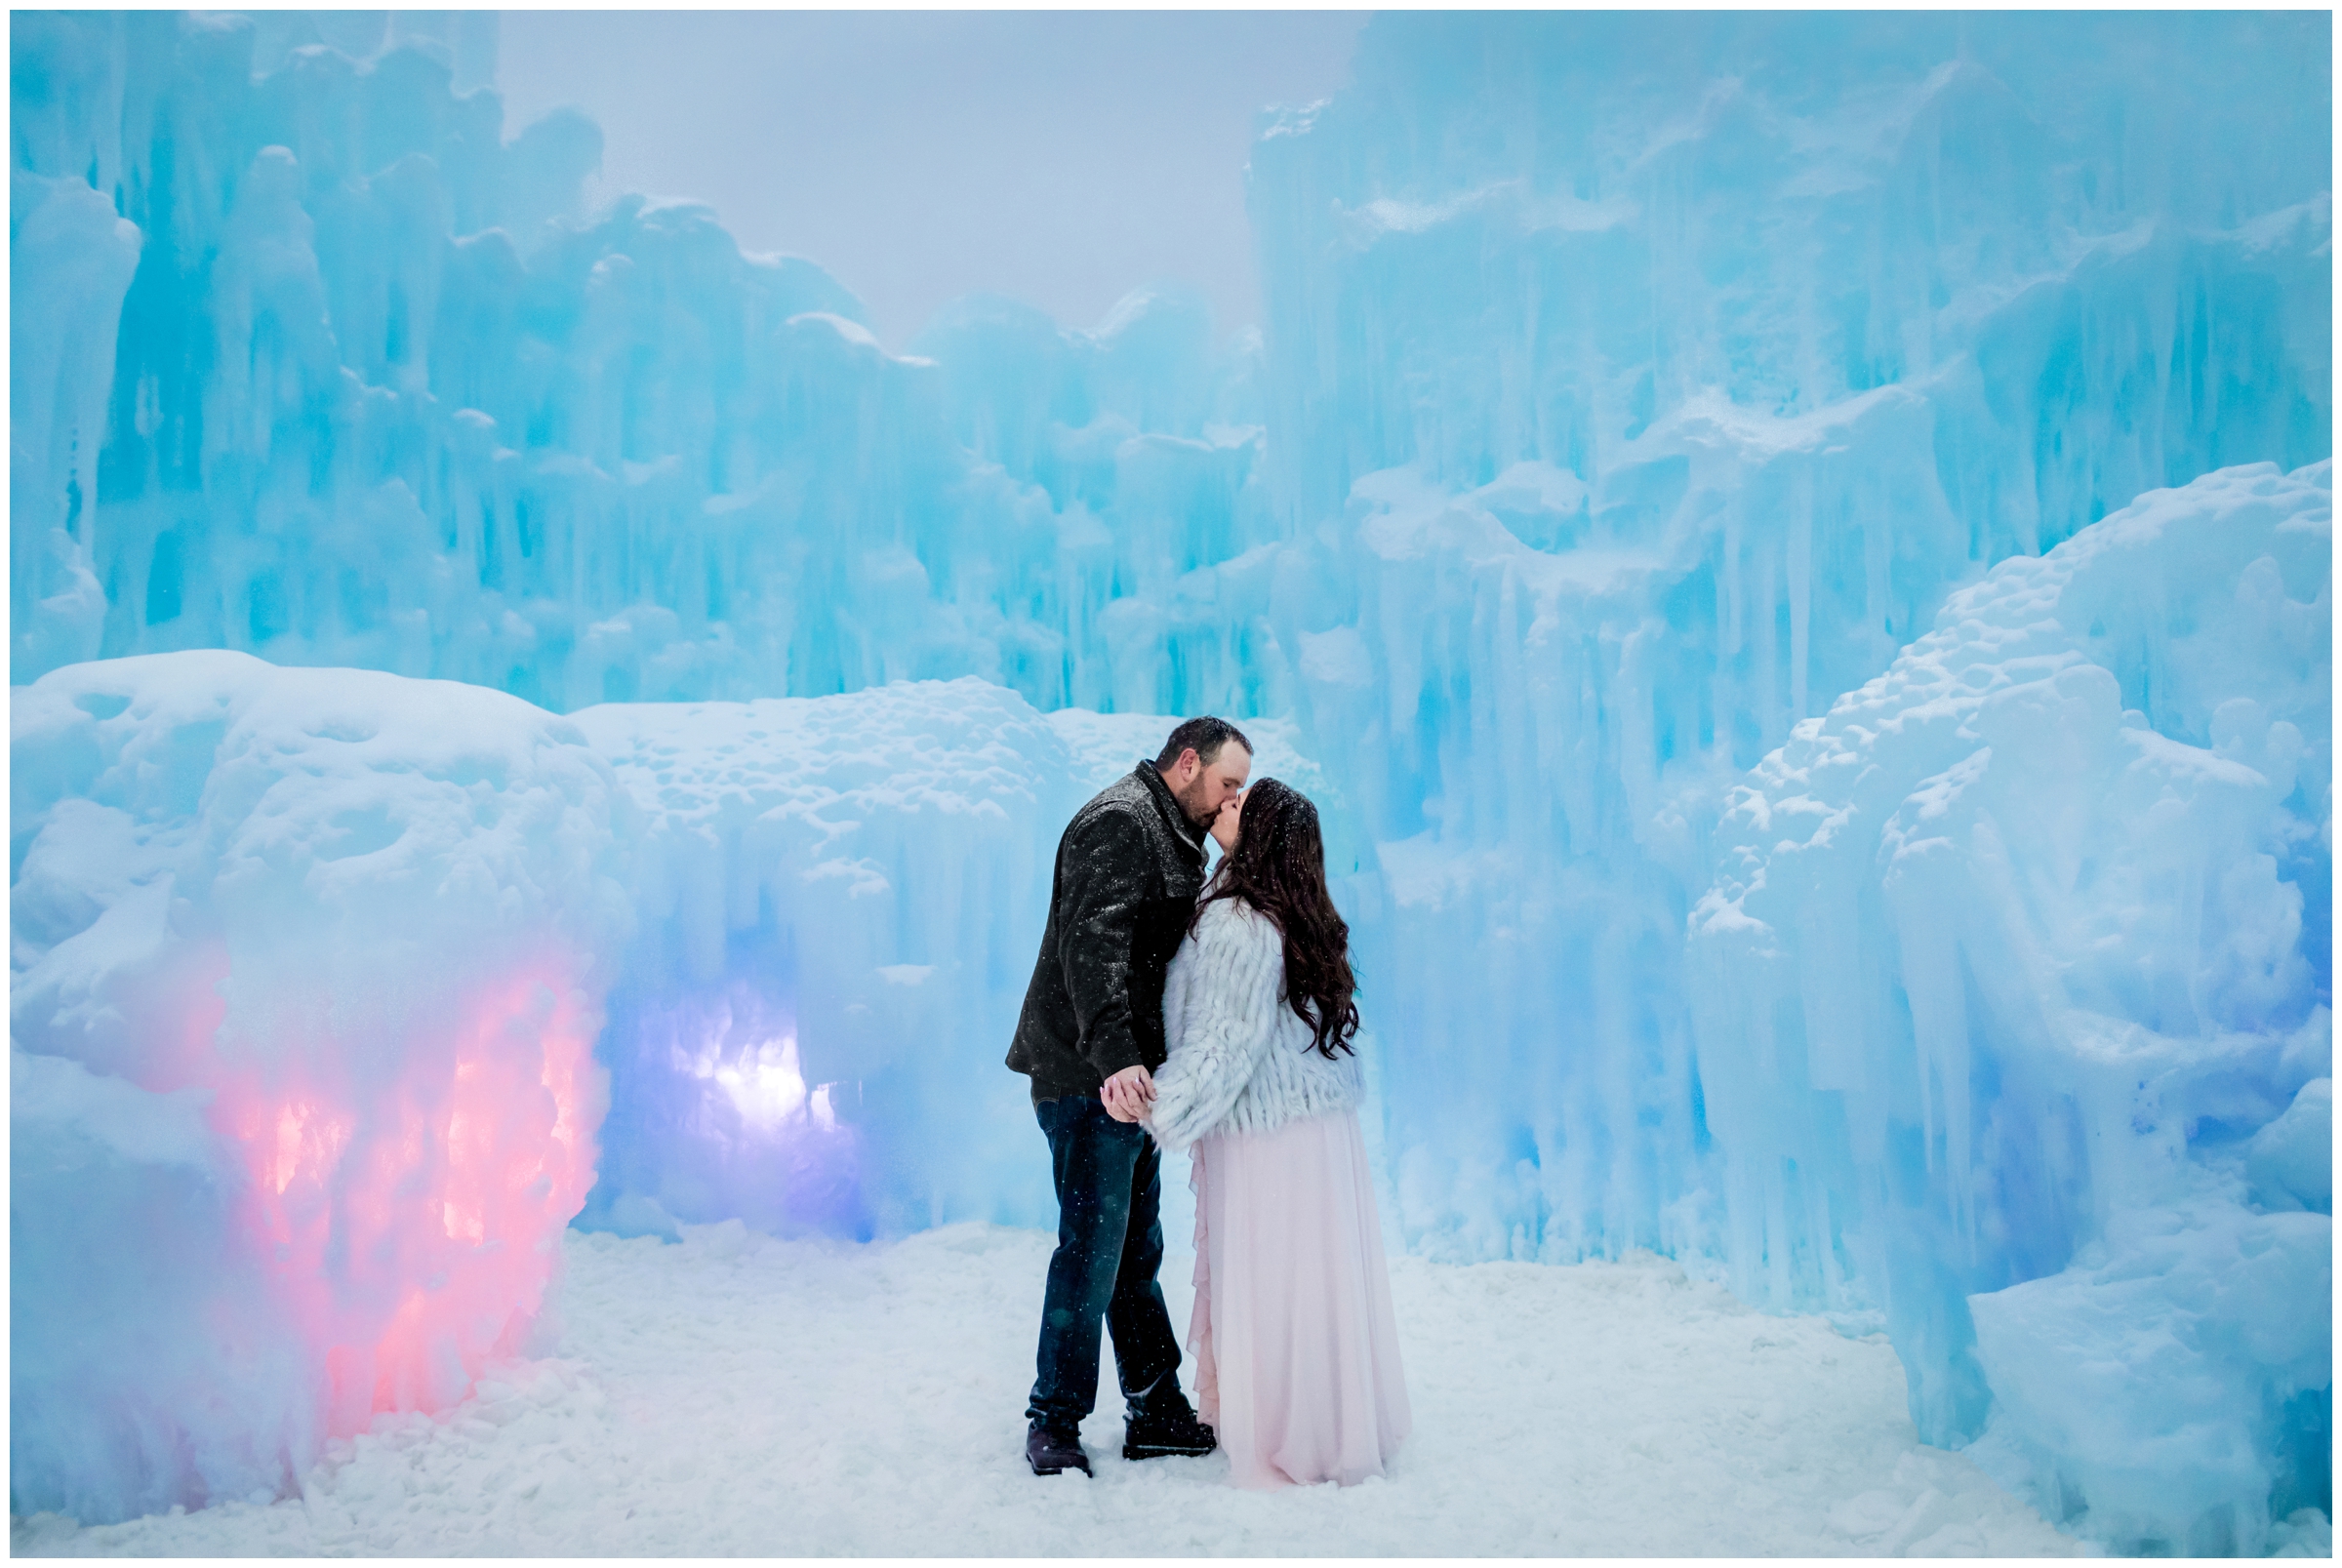 winter engagement photography inspiration by Plum Pretty Photo at Colorado Ice castles